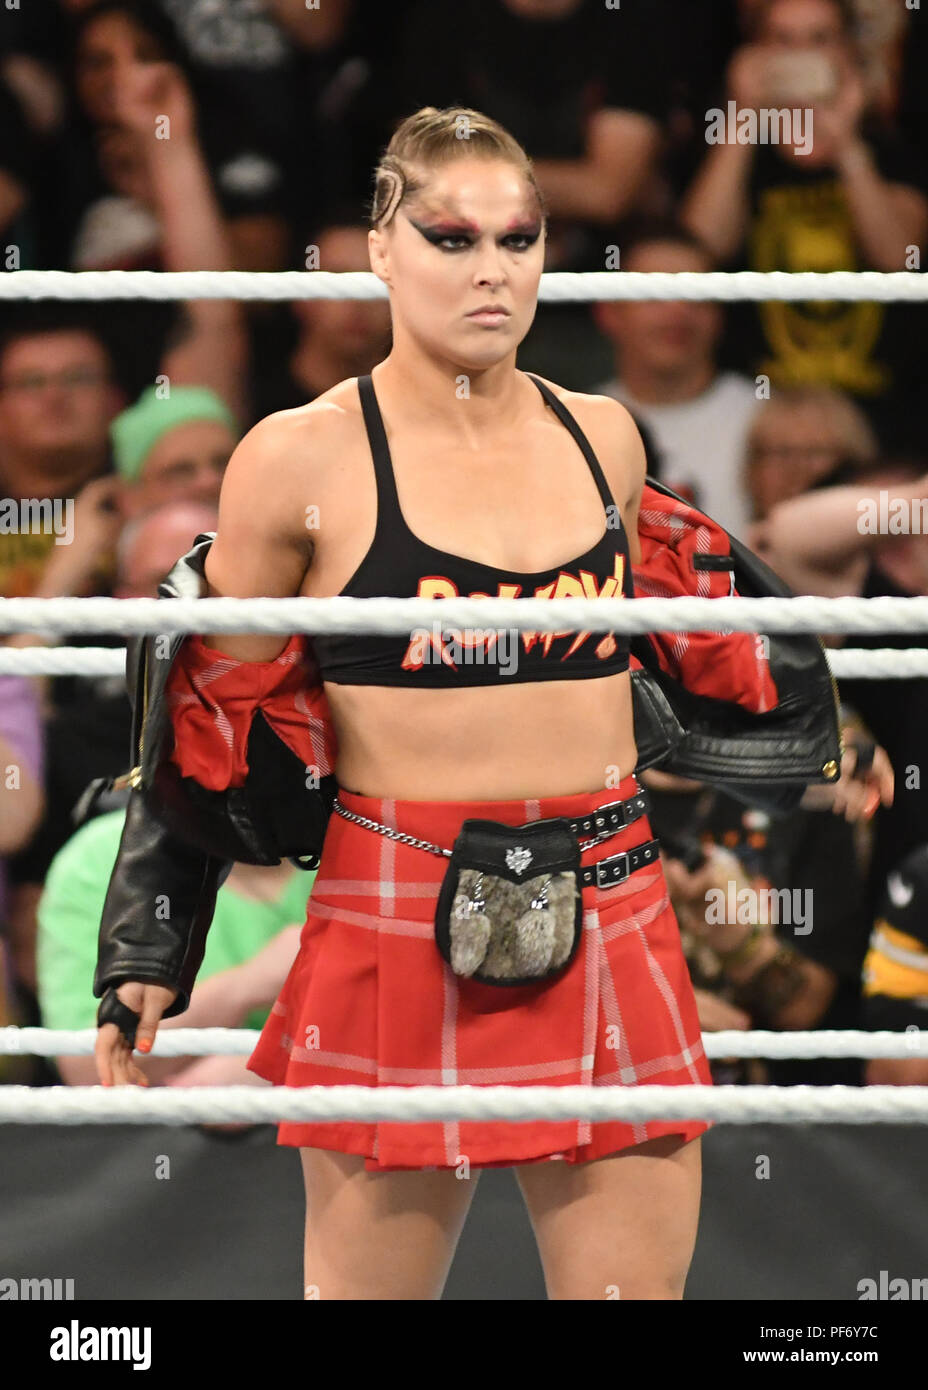 Brooklyn, NY, USA. 19th Aug, 2018. Ronda Rousey at WWE SummerSlam 2018 at The Barclays Center in Brooklyn, New York City on August 19, 2018. Credit: George Napolitano/Media Punch/Alamy Live News Stock Photo